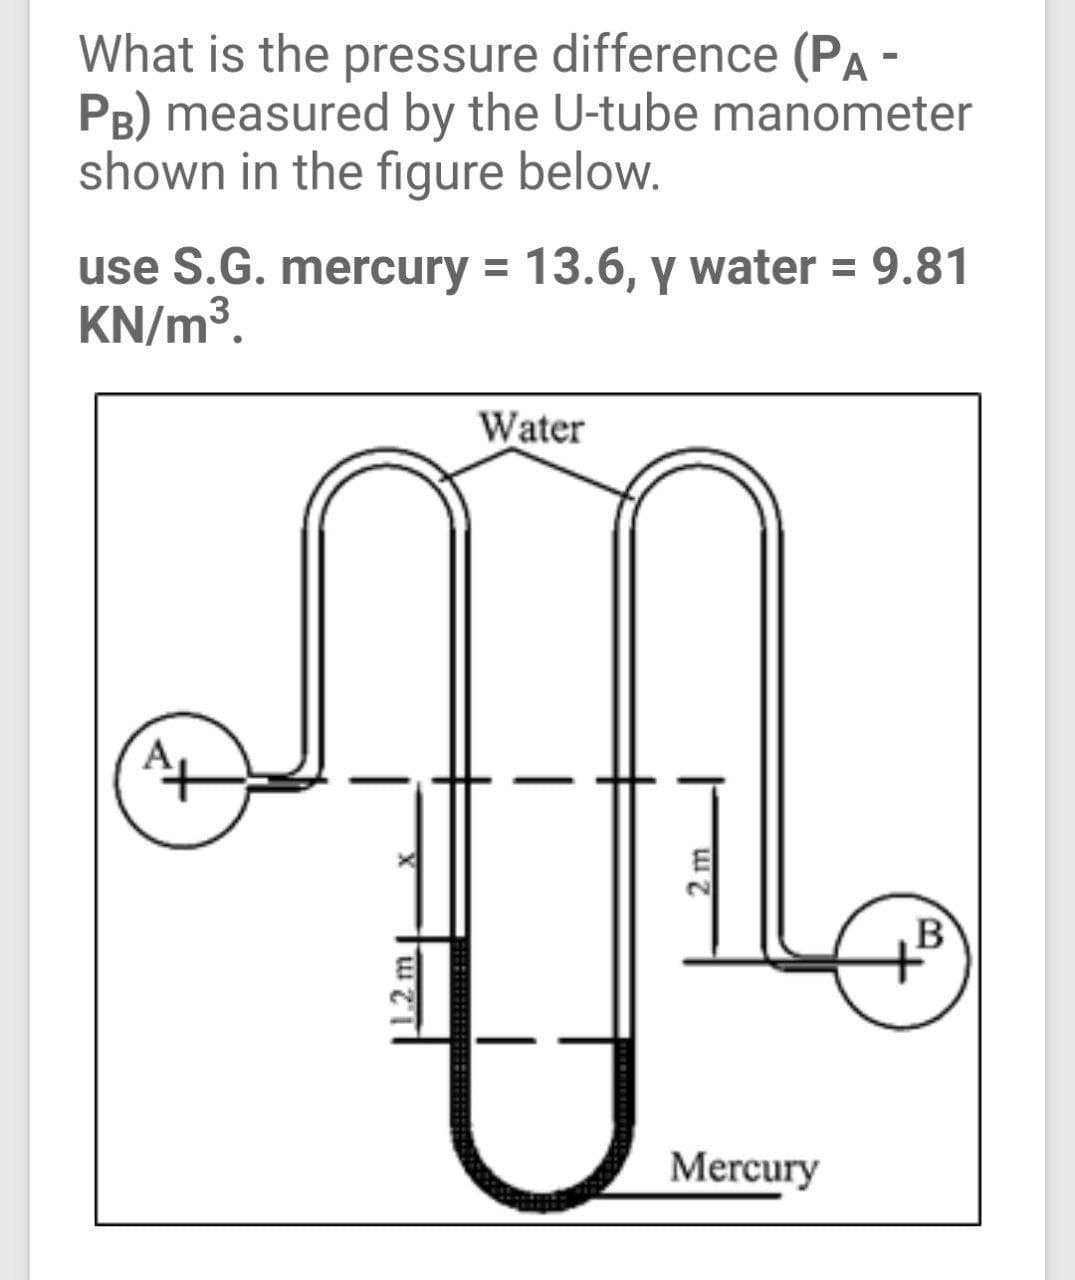 What is the pressure difference (PA -
PB) measured by the U-tube manometer
shown in the figure below.
use S.G. mercury = 13.6, y water = 9.81
KN/m³.
Water
E
B
Mercury
2 m
